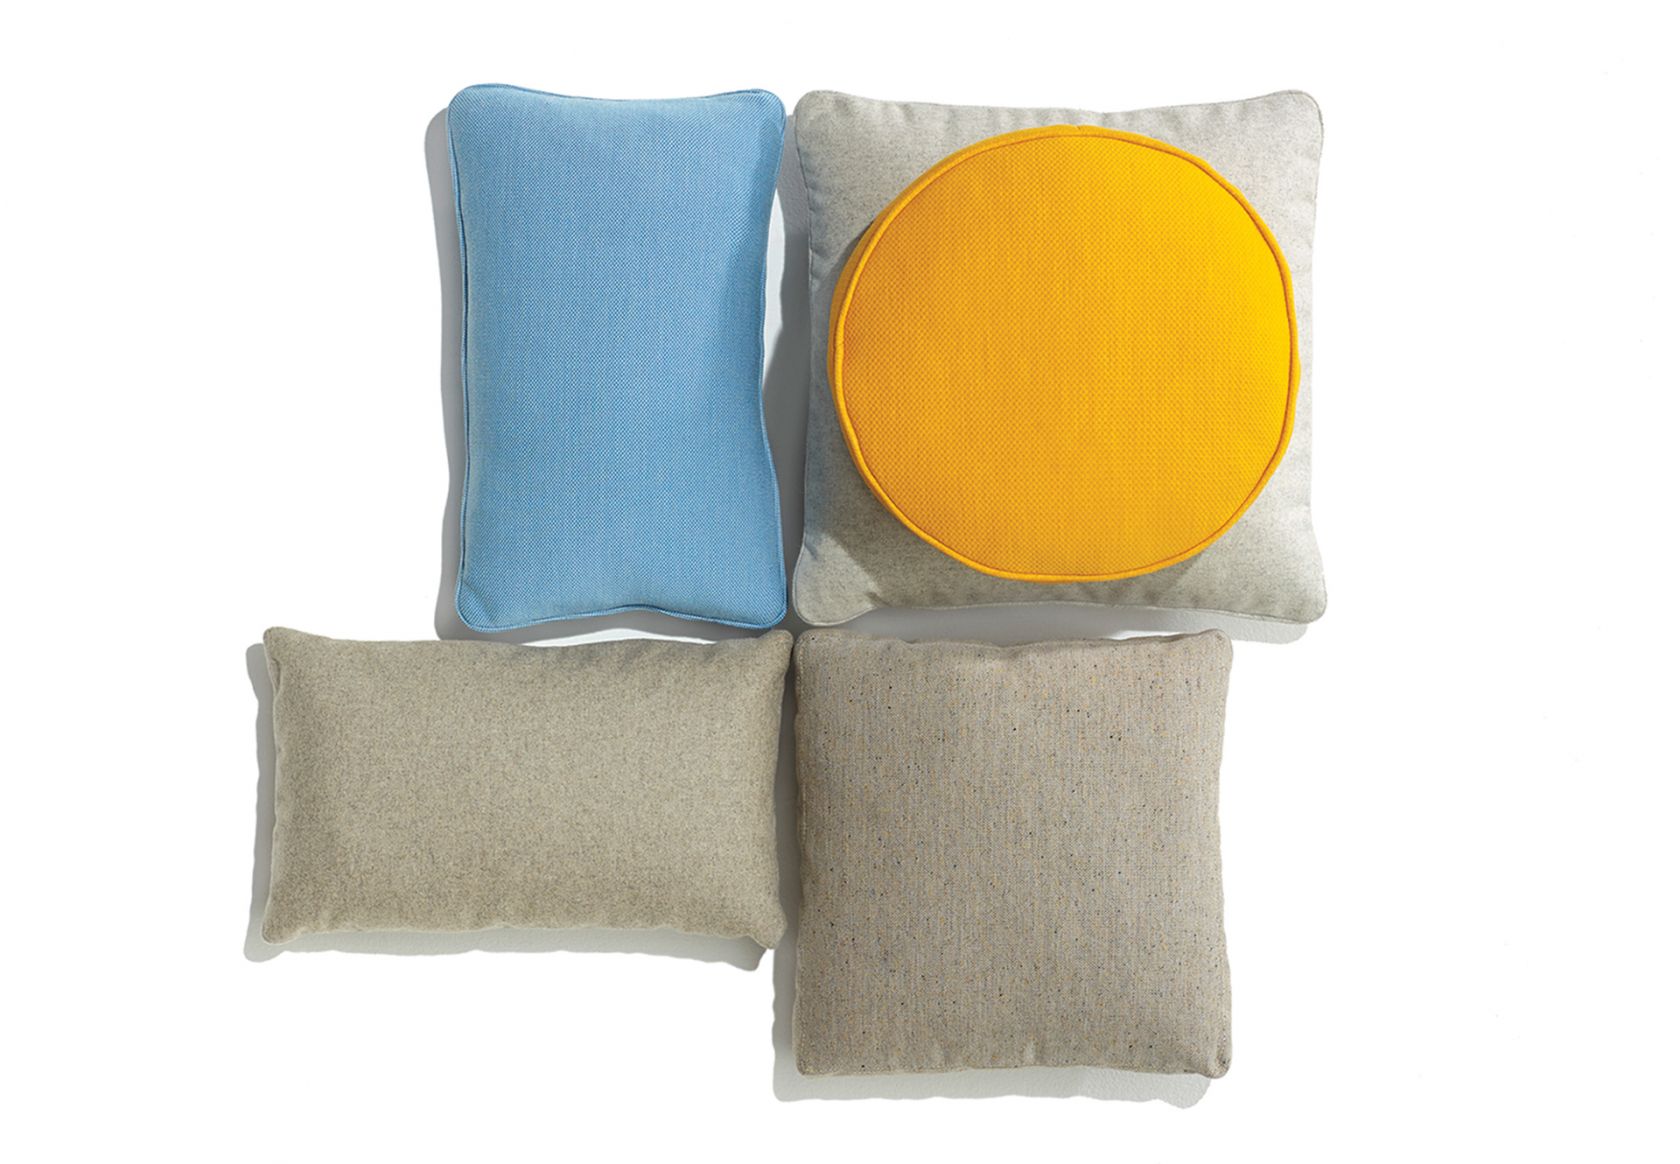 Scatter Platter Cushions Collection grey blue and yellow